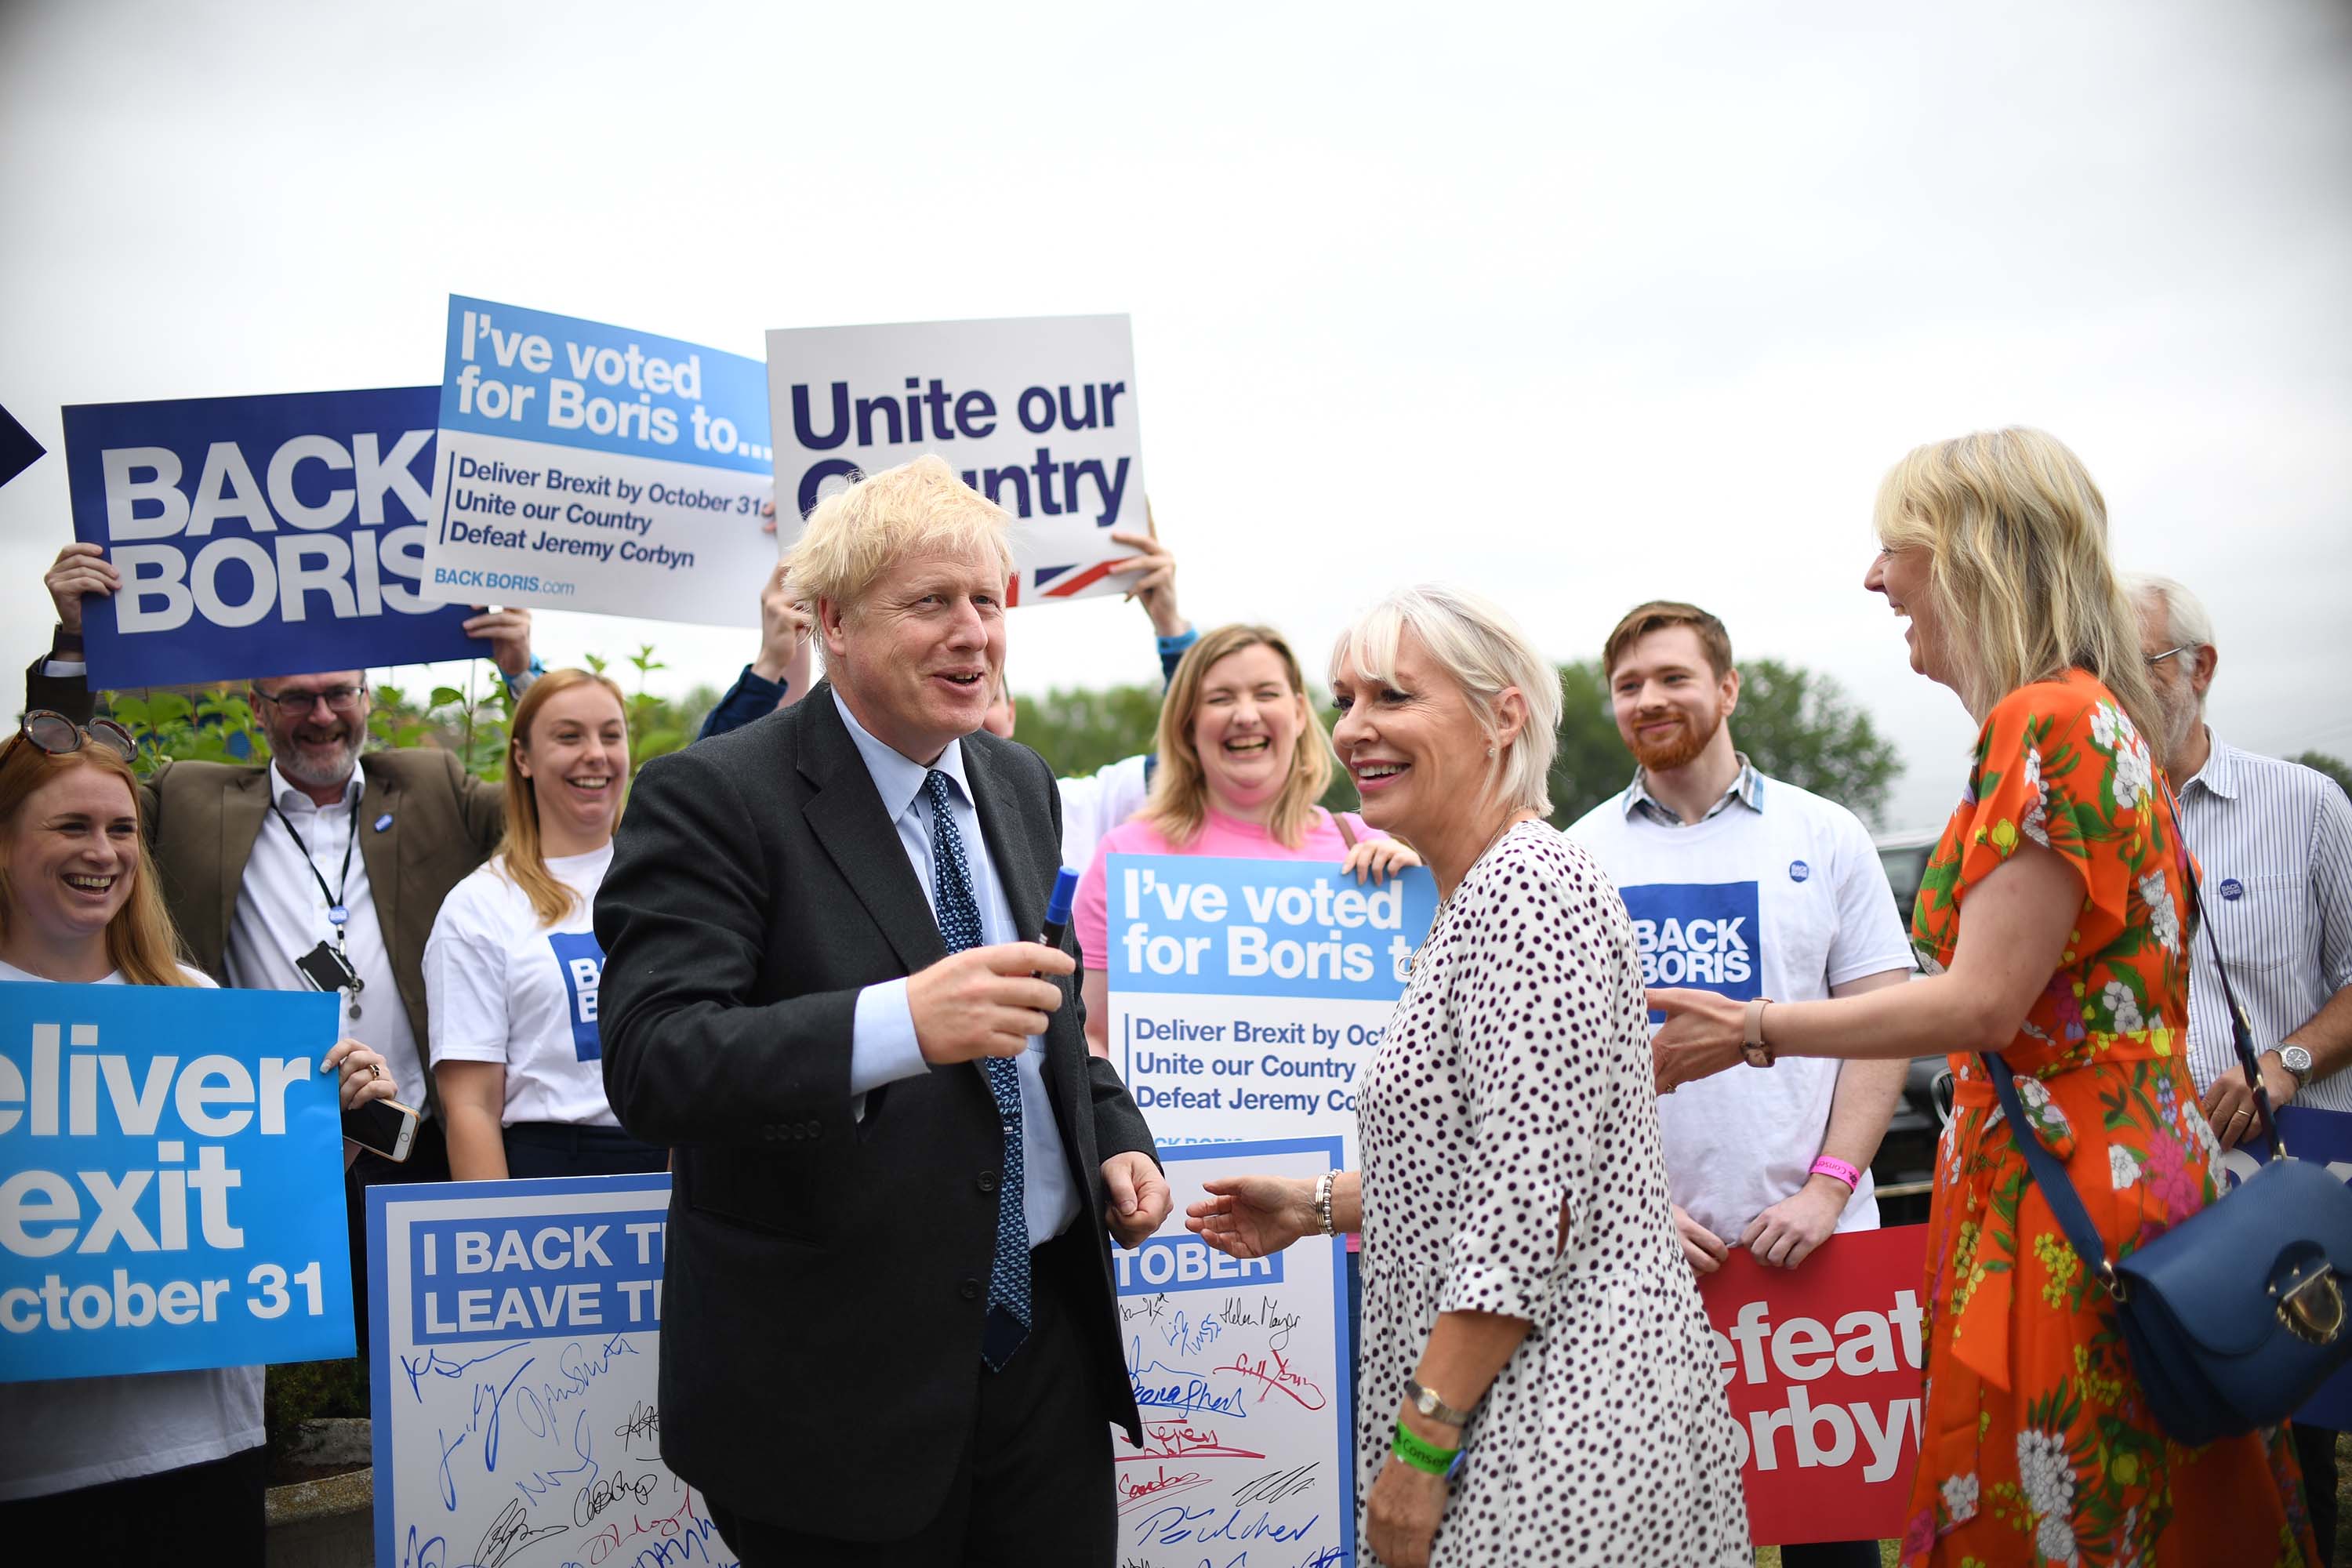 Boris Johnson appears with Nadine Dorries during an event in Wyboston, Bedfordshire, in July 2019.